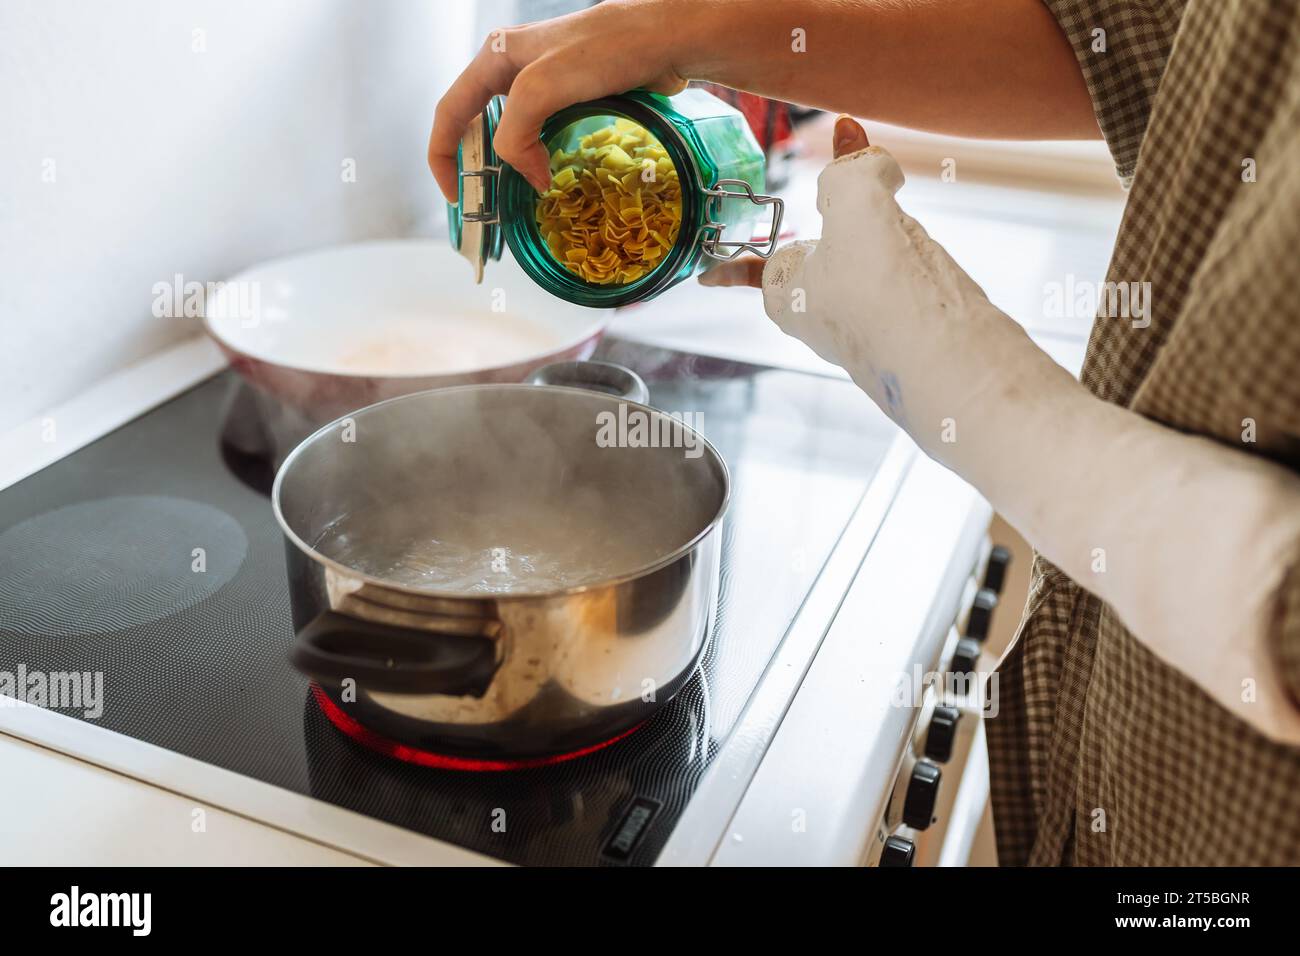 https://c8.alamy.com/comp/2T5BGNR/teenage-girl-with-cast-on-arm-cook-lunch-at-home-2T5BGNR.jpg